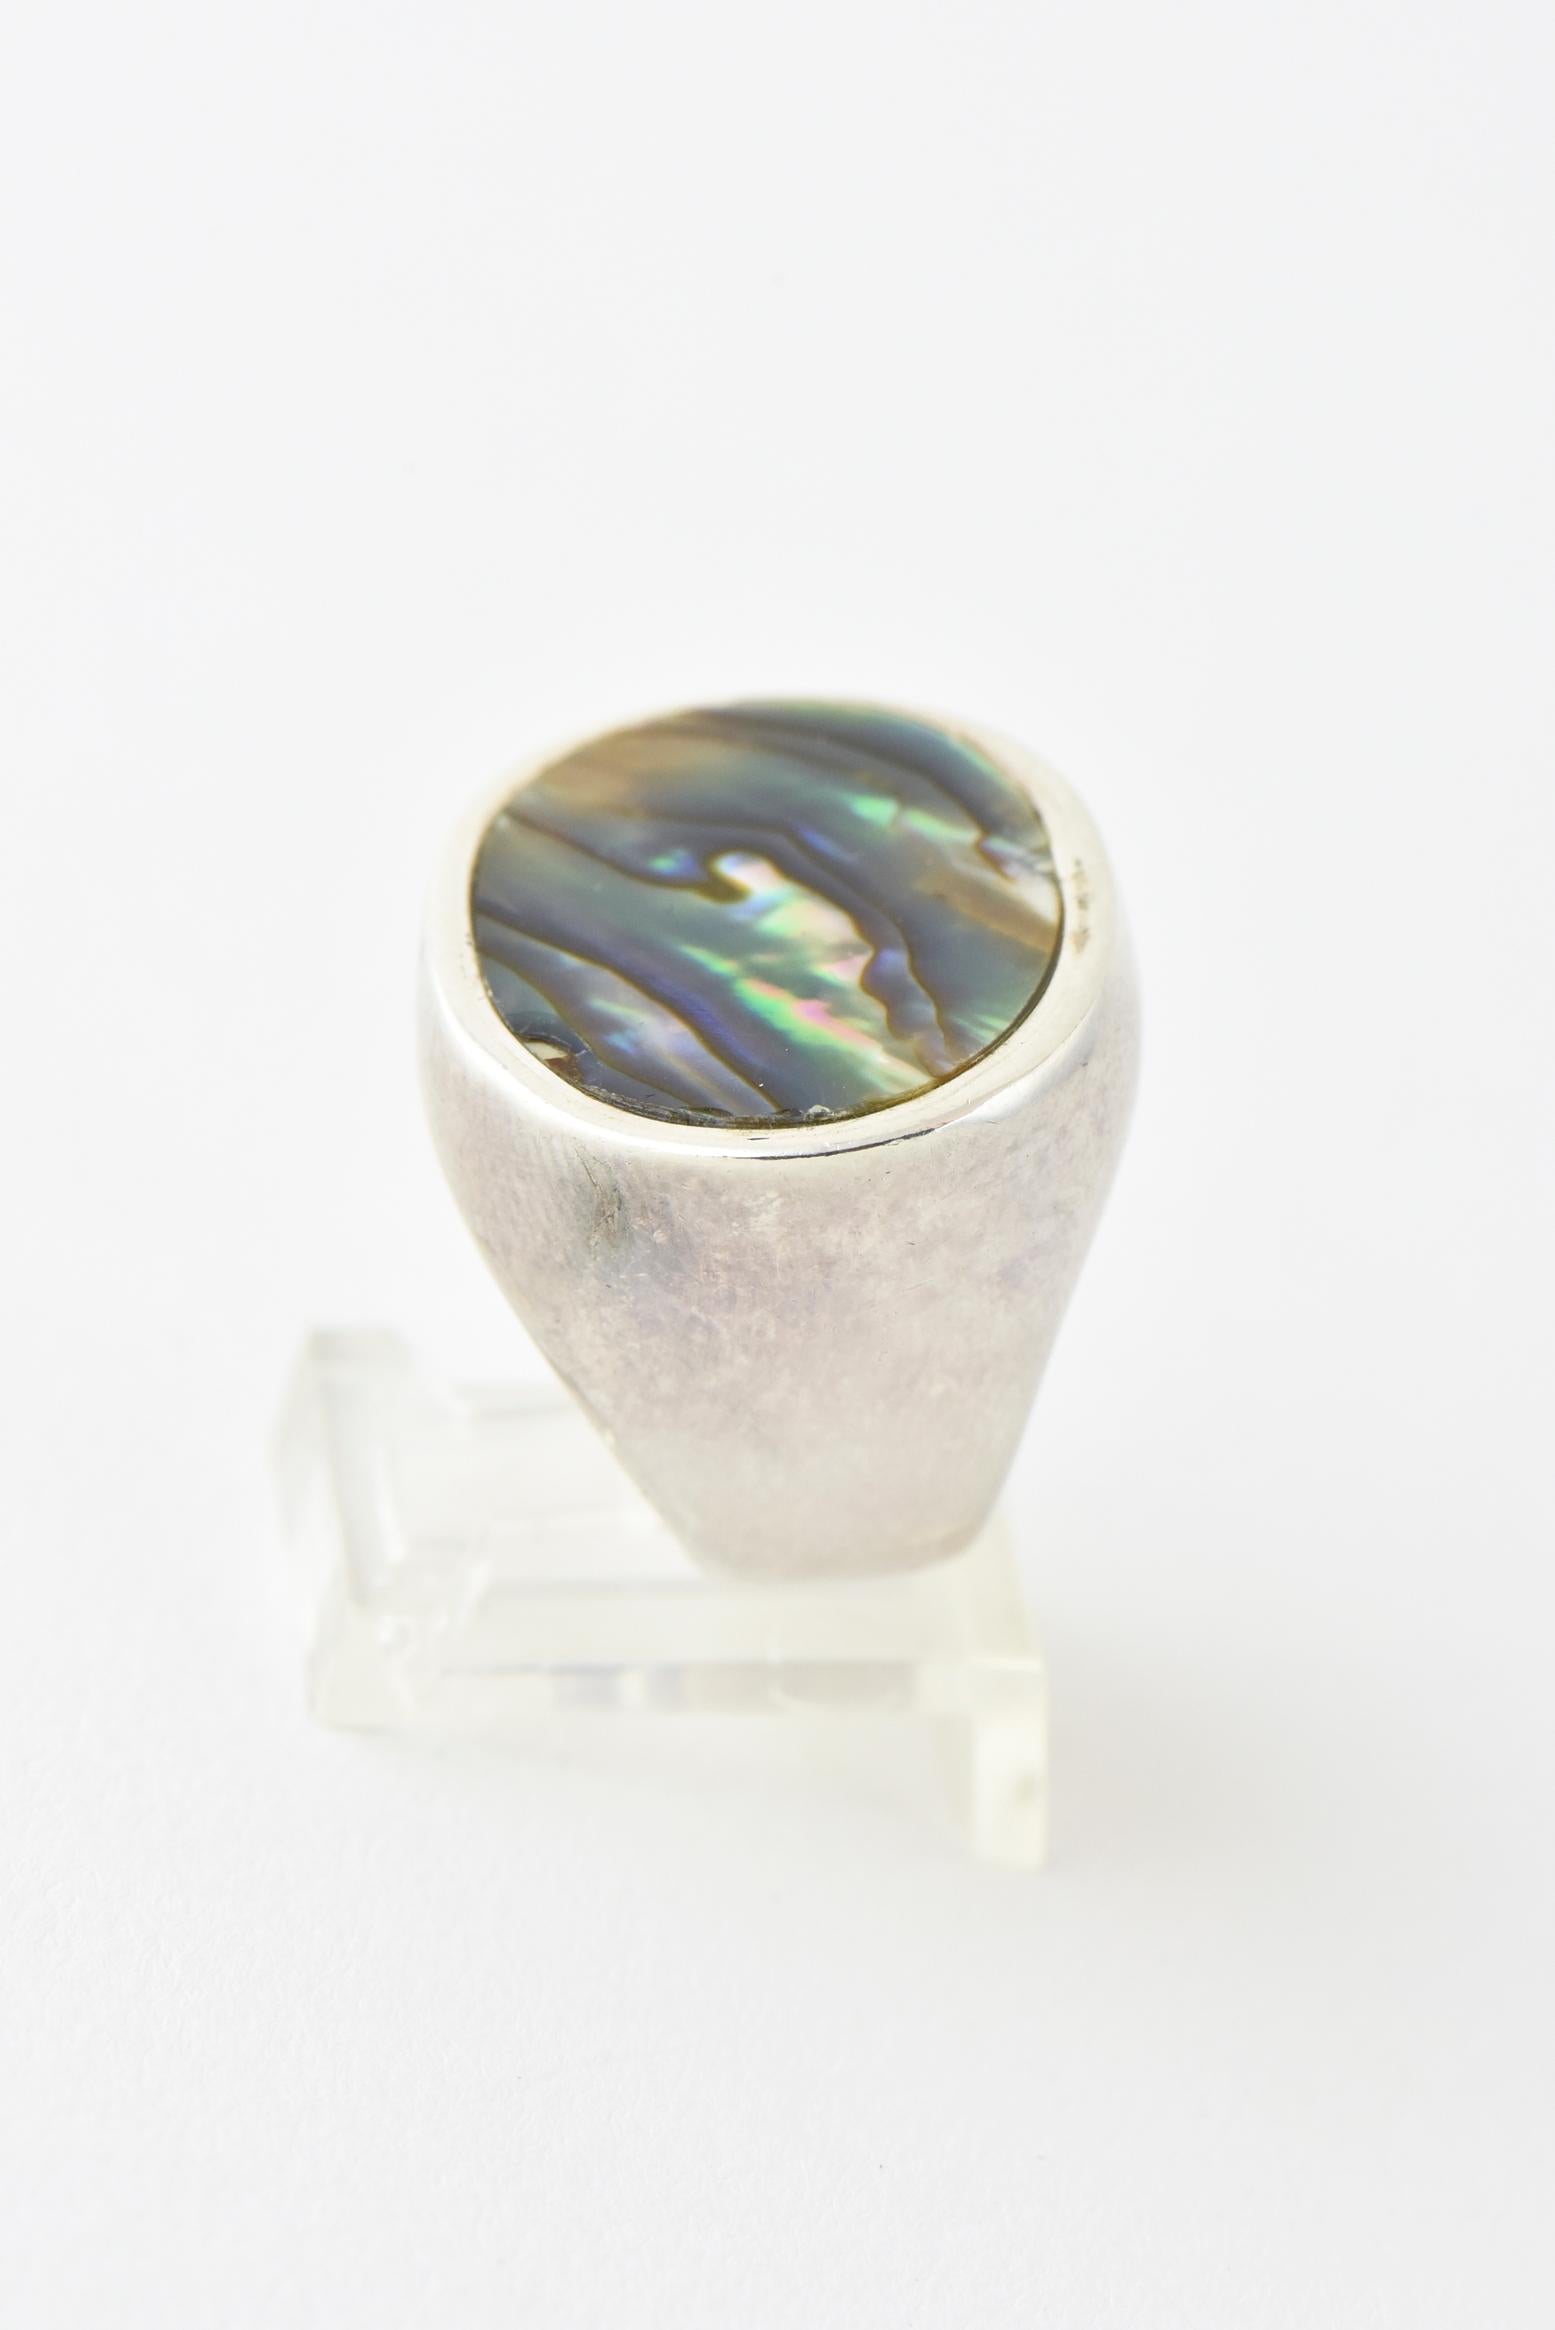 Barry Brinker Abalone Shell Sterling Silver Ring In Fair Condition For Sale In Miami Beach, FL